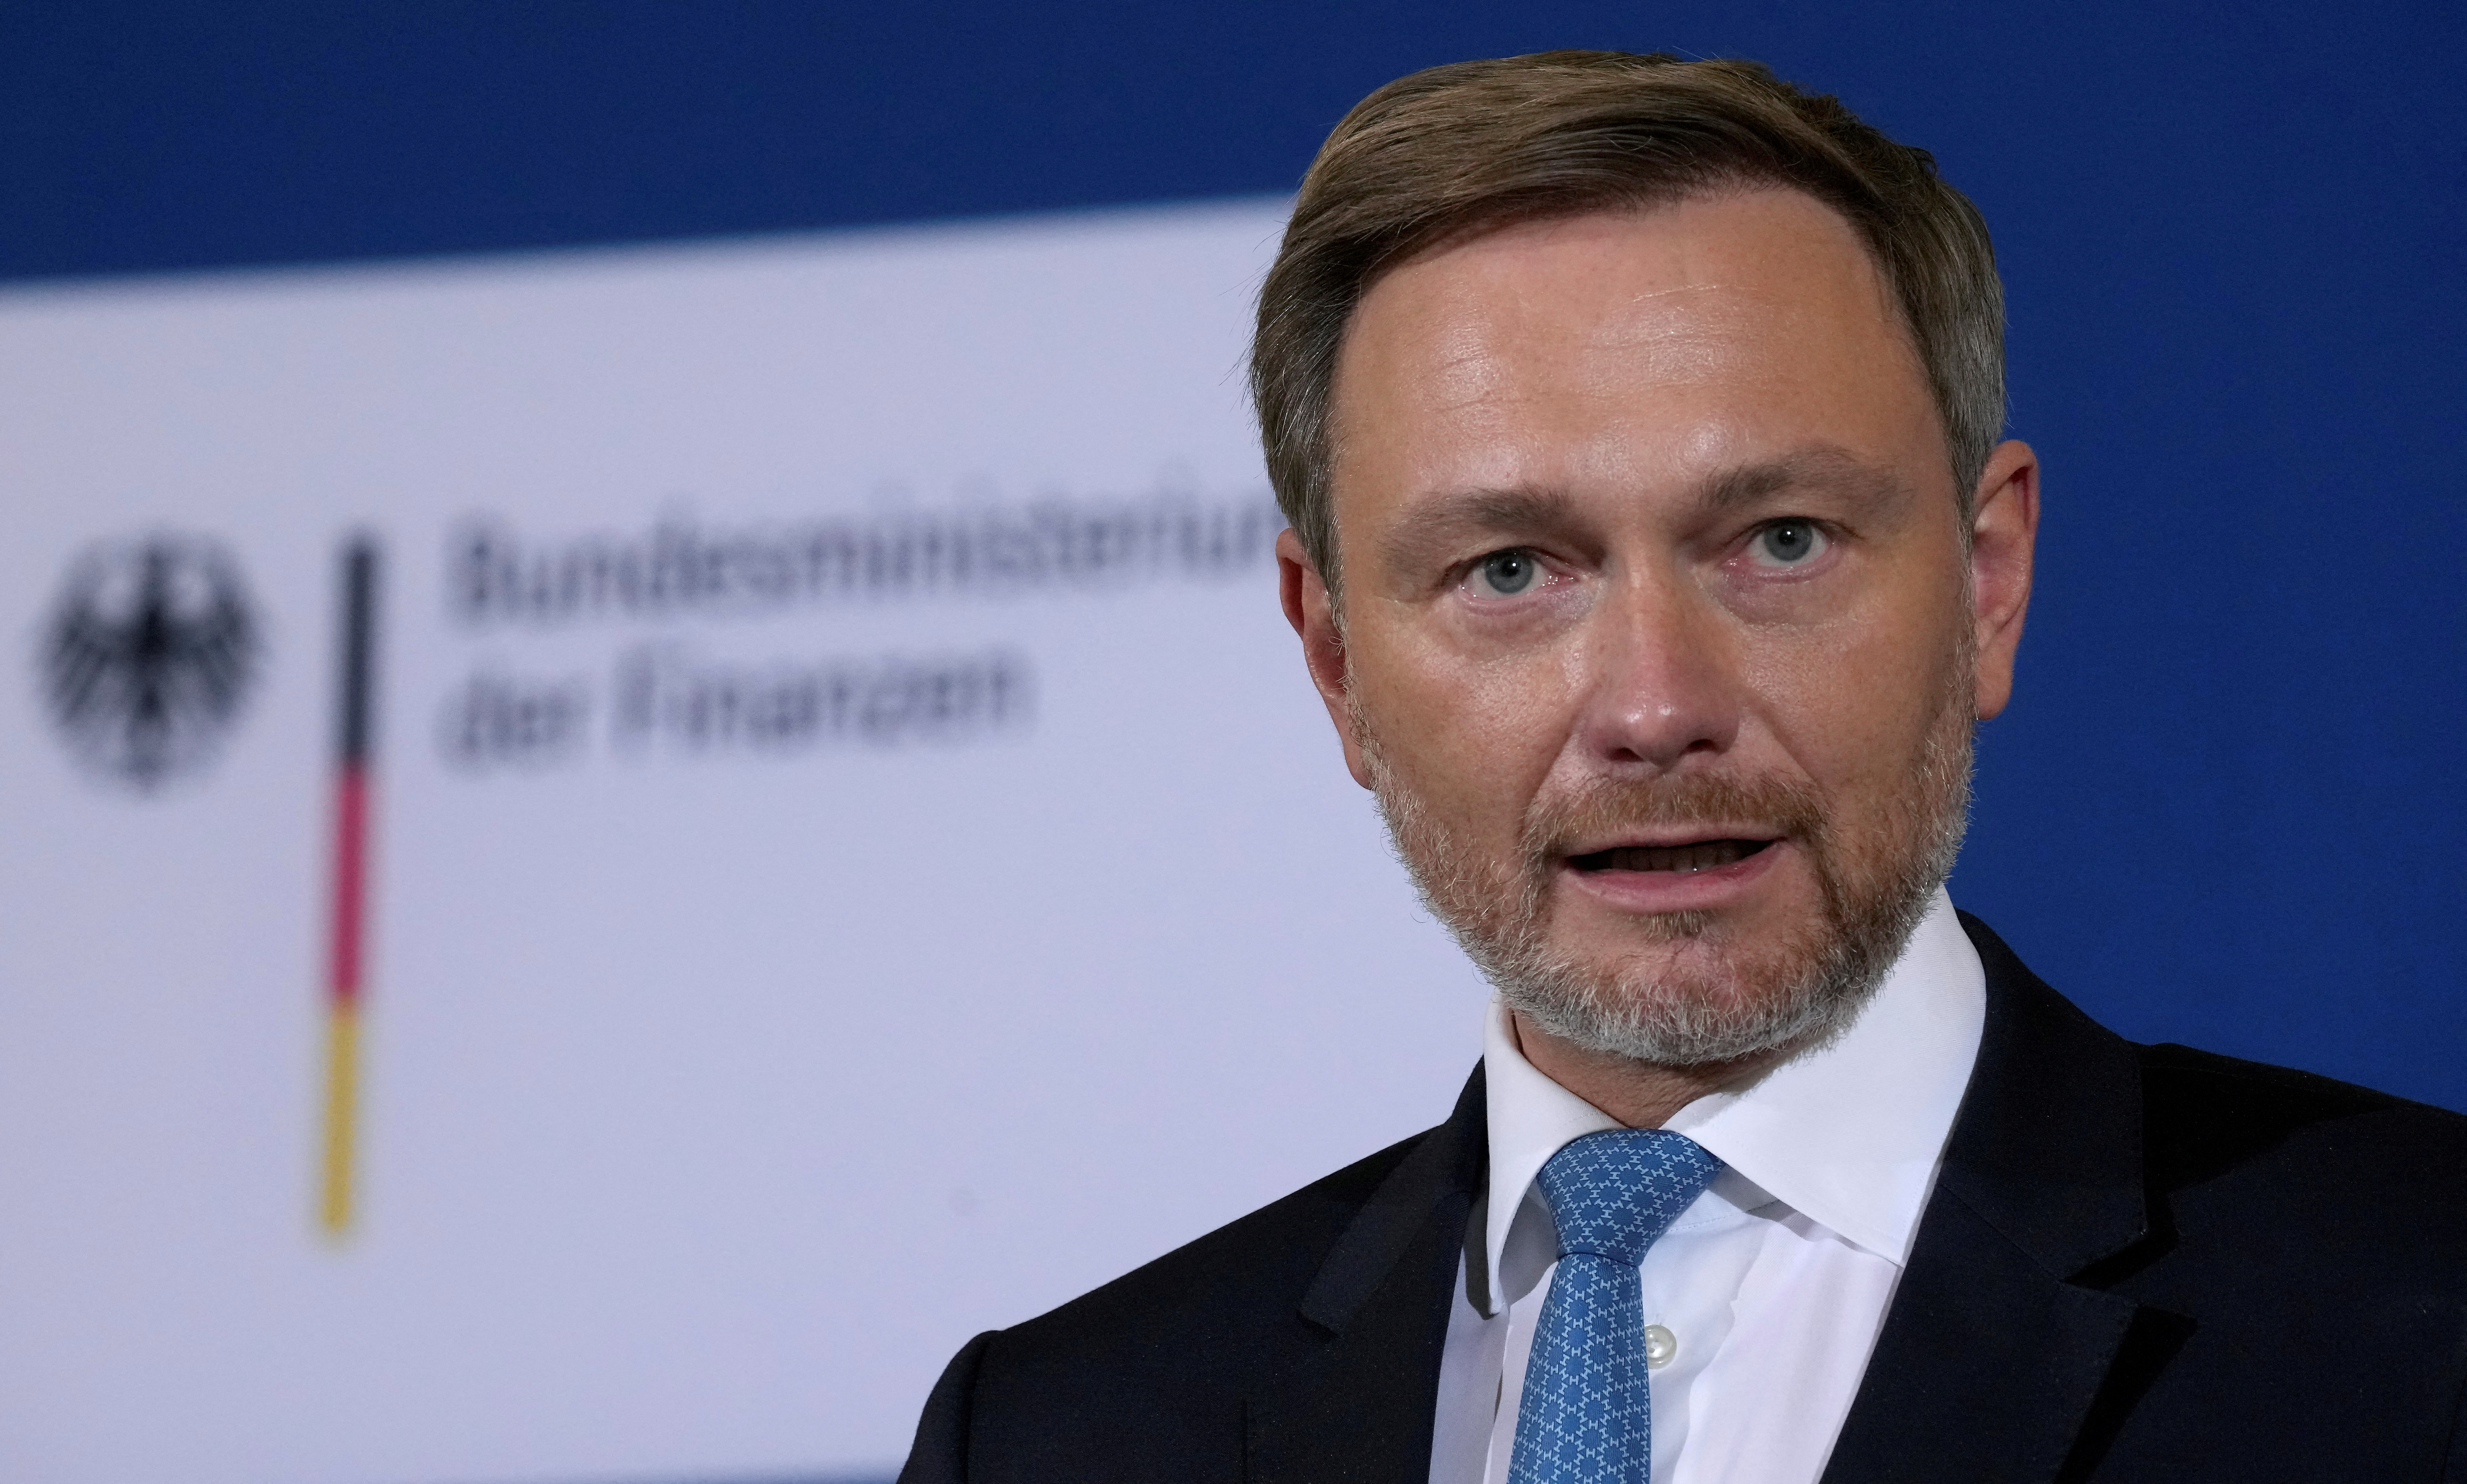 German Finance Minister Christian Lindner attends a news conference after a meeting of the stability council in Berlin